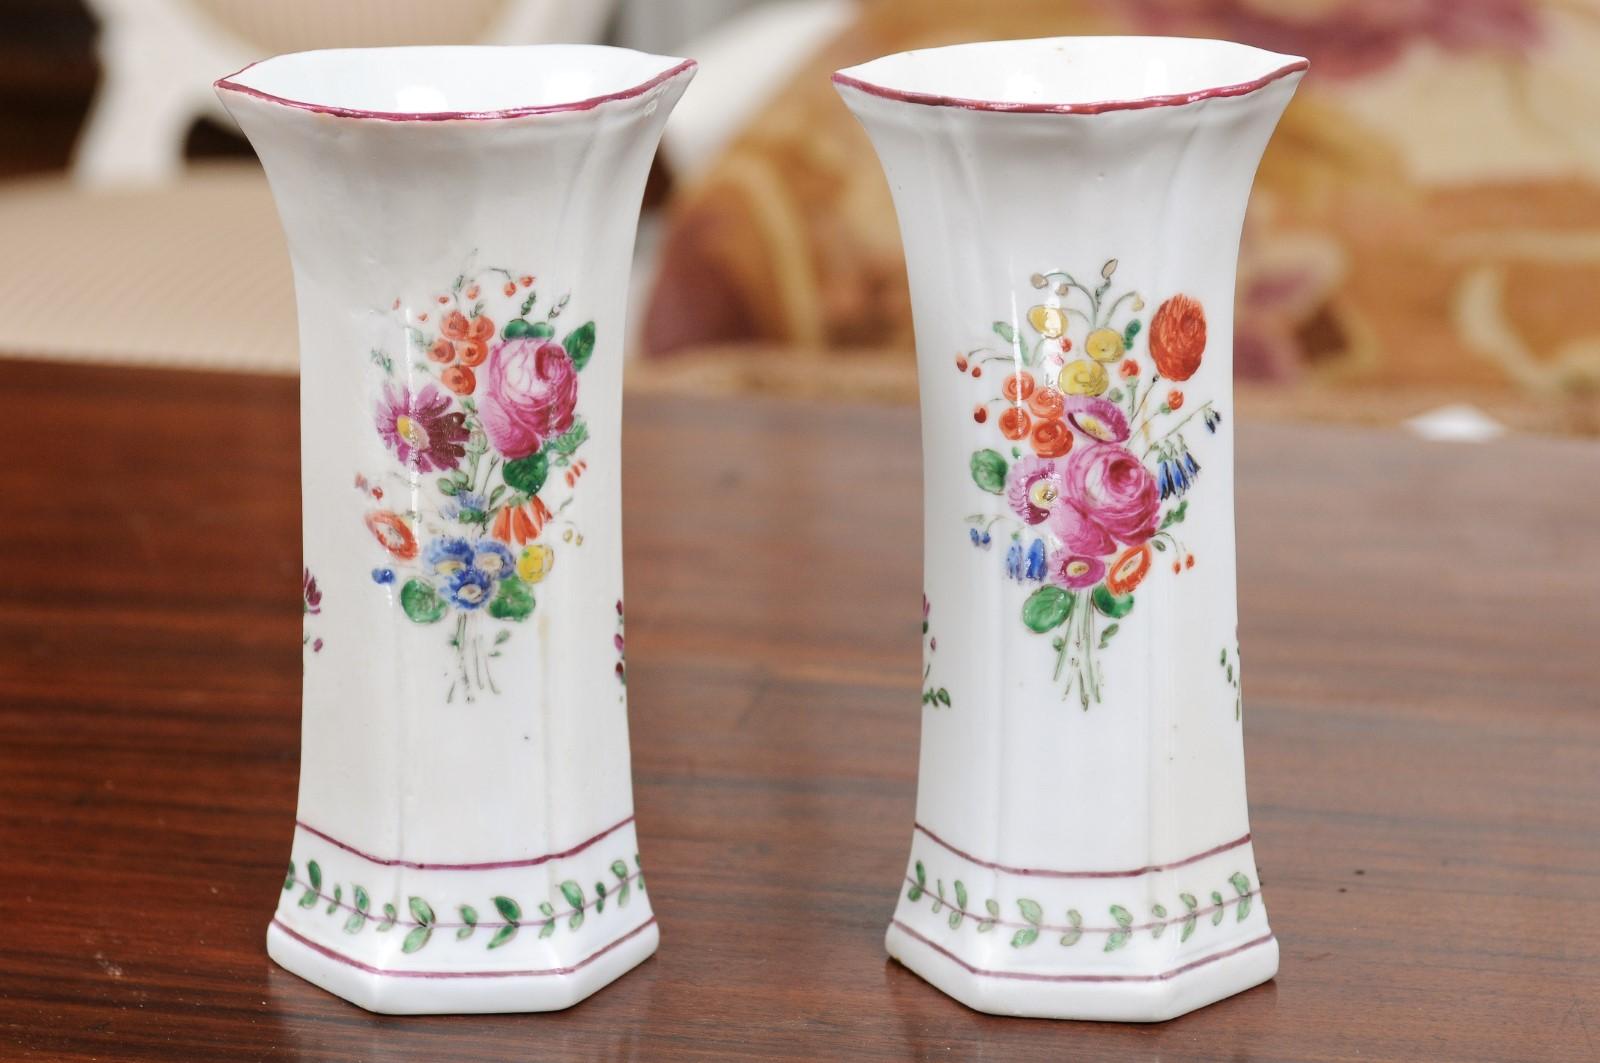 Pair of Italian Porcelain Vases with Colorful Painted Floral Motifs, circa 1805 For Sale 8